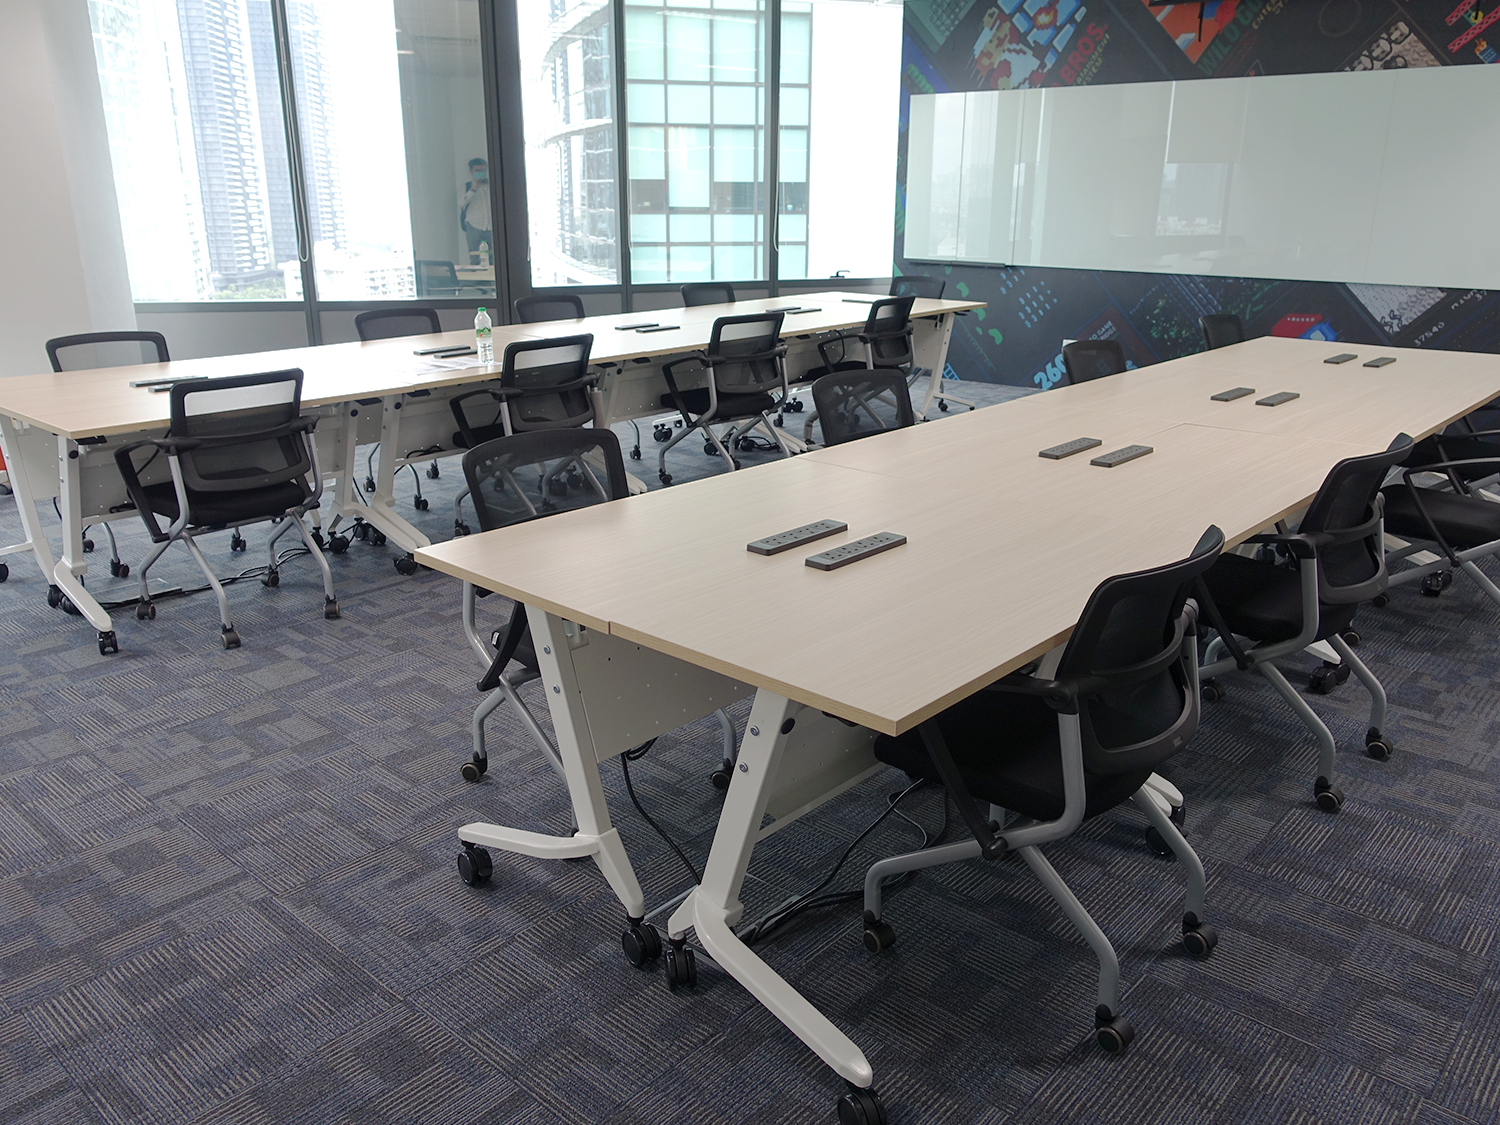 Virtuos (KL) | Office Furniture Project Malaysia